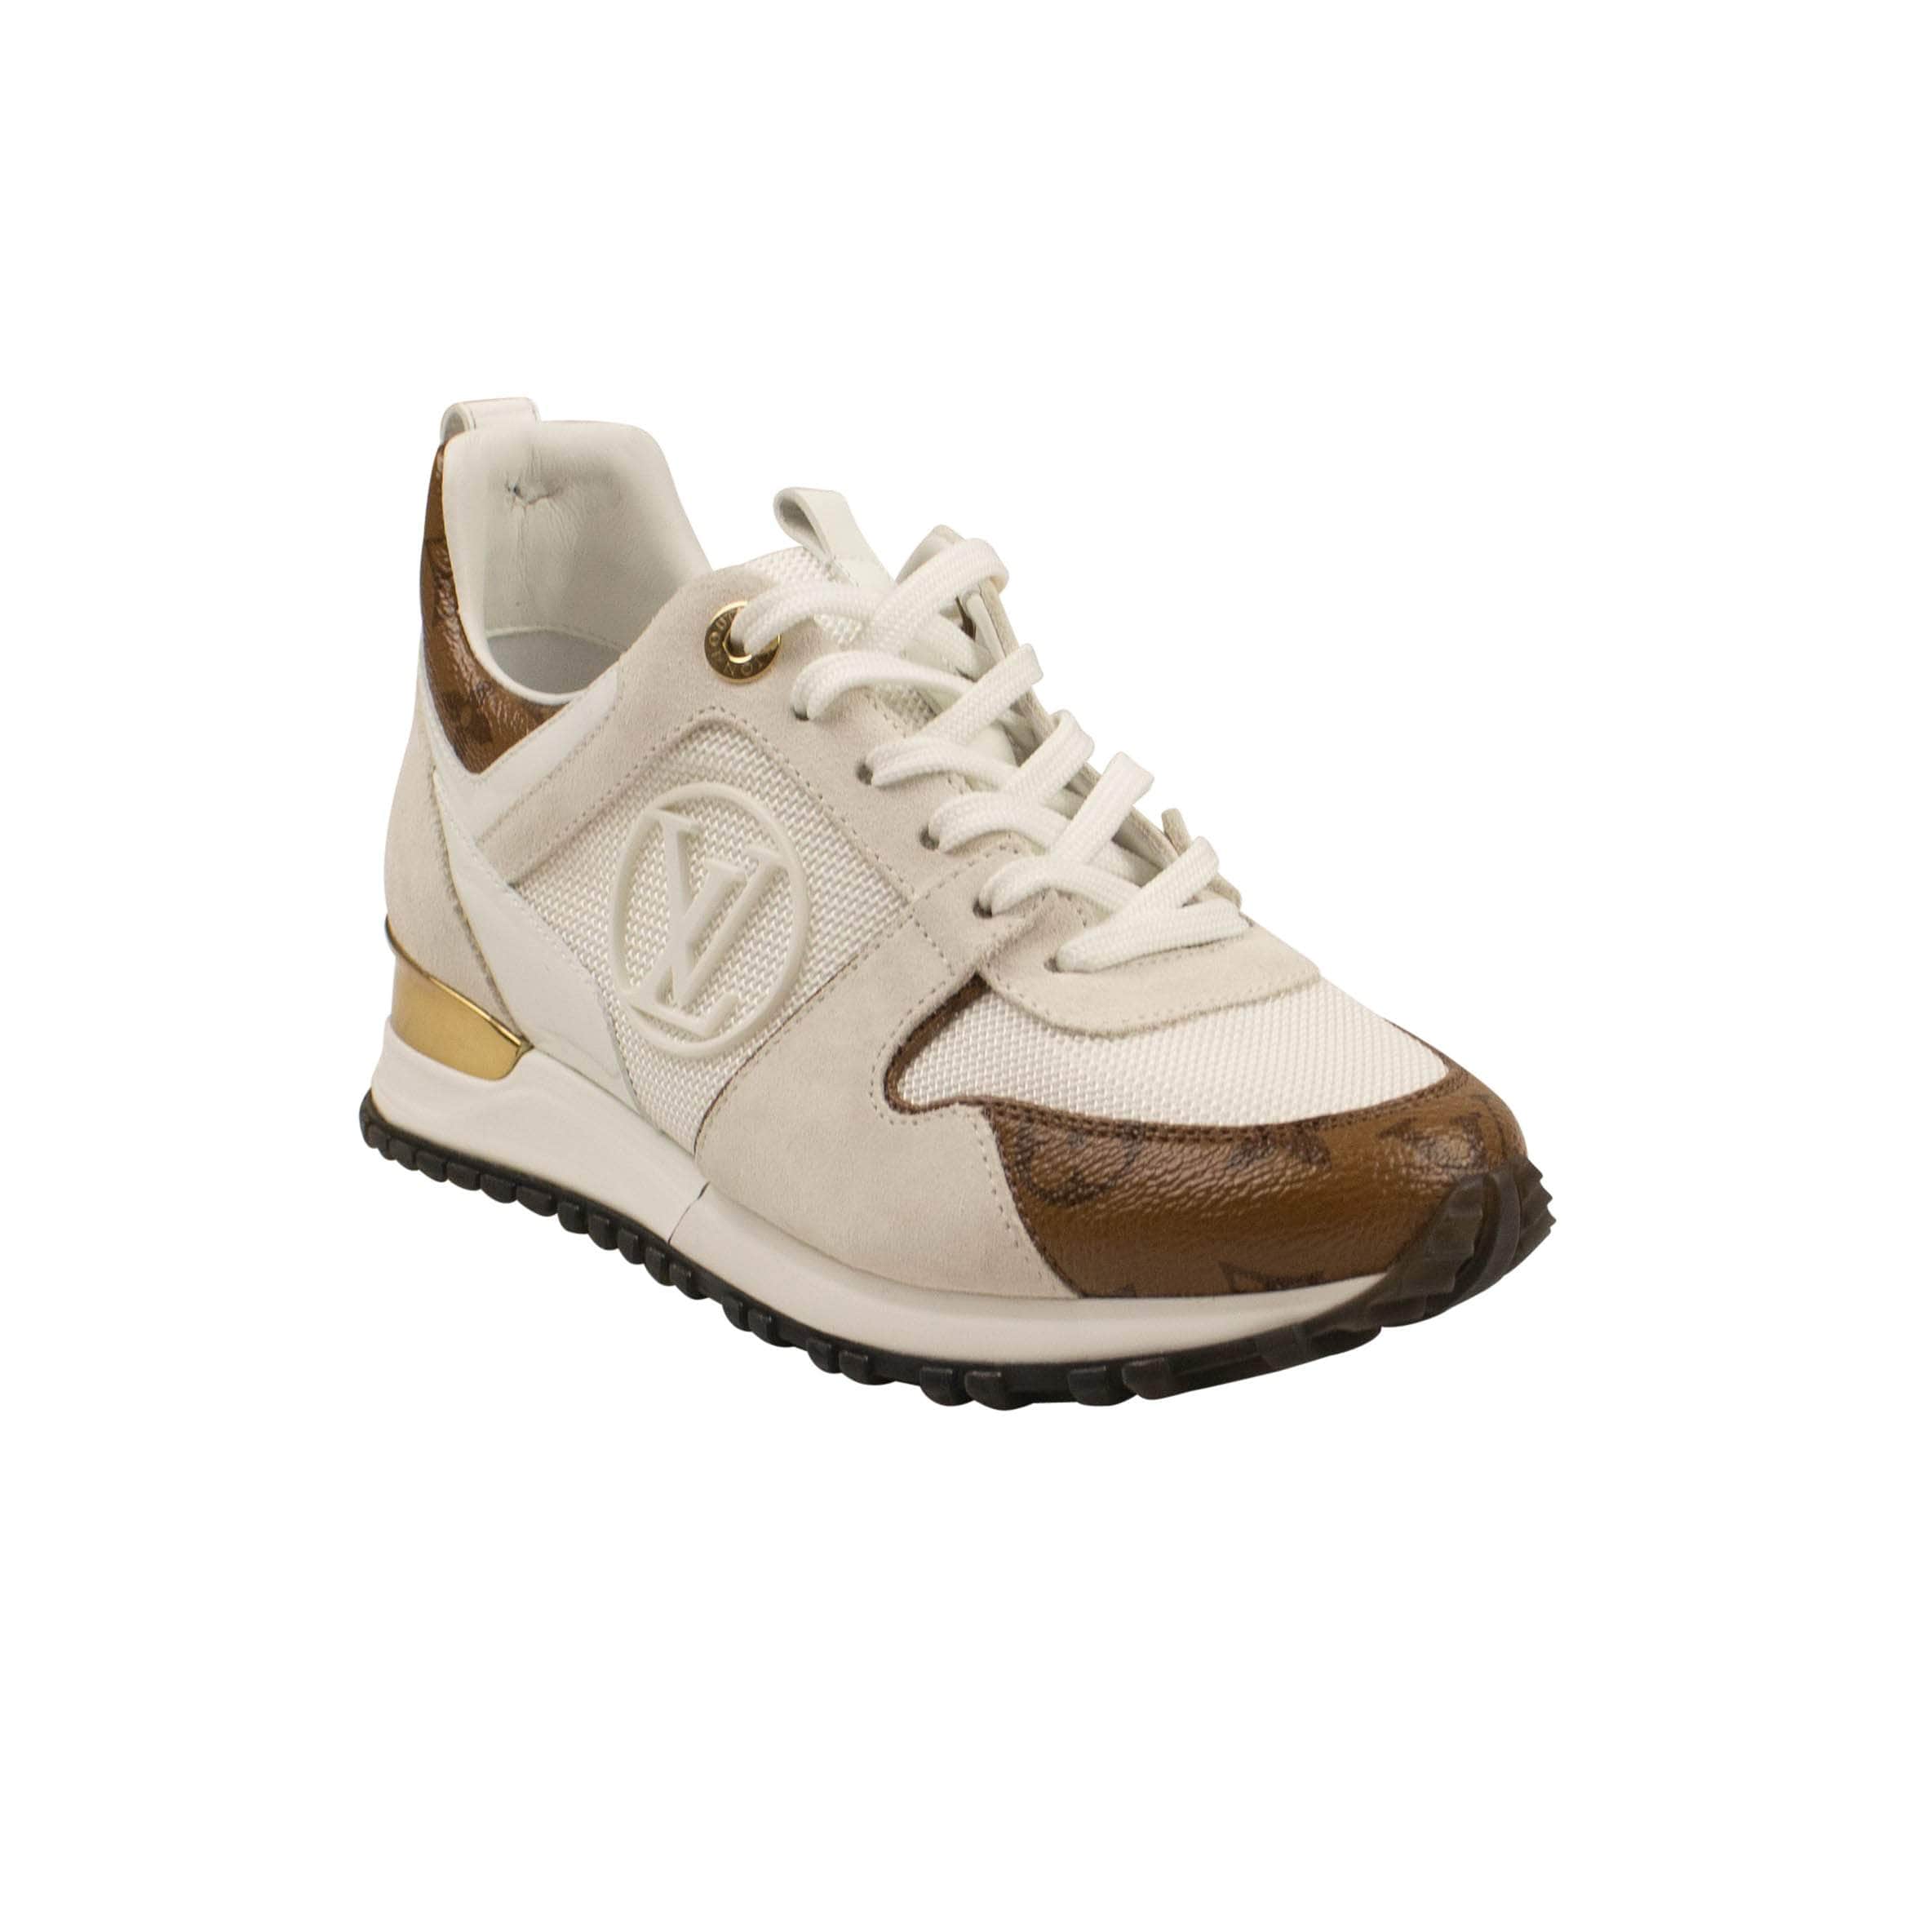 Louis Vuitton 500-750, channelenable-all, chicmi, couponcollection, gender-womens, main-shoes, SPO, stadiumgoods 5 US / 35 EU / 1A4XNL White LV Monogram Run Away Sneakers 95-LVT-2059/35 95-LVT-2059/35